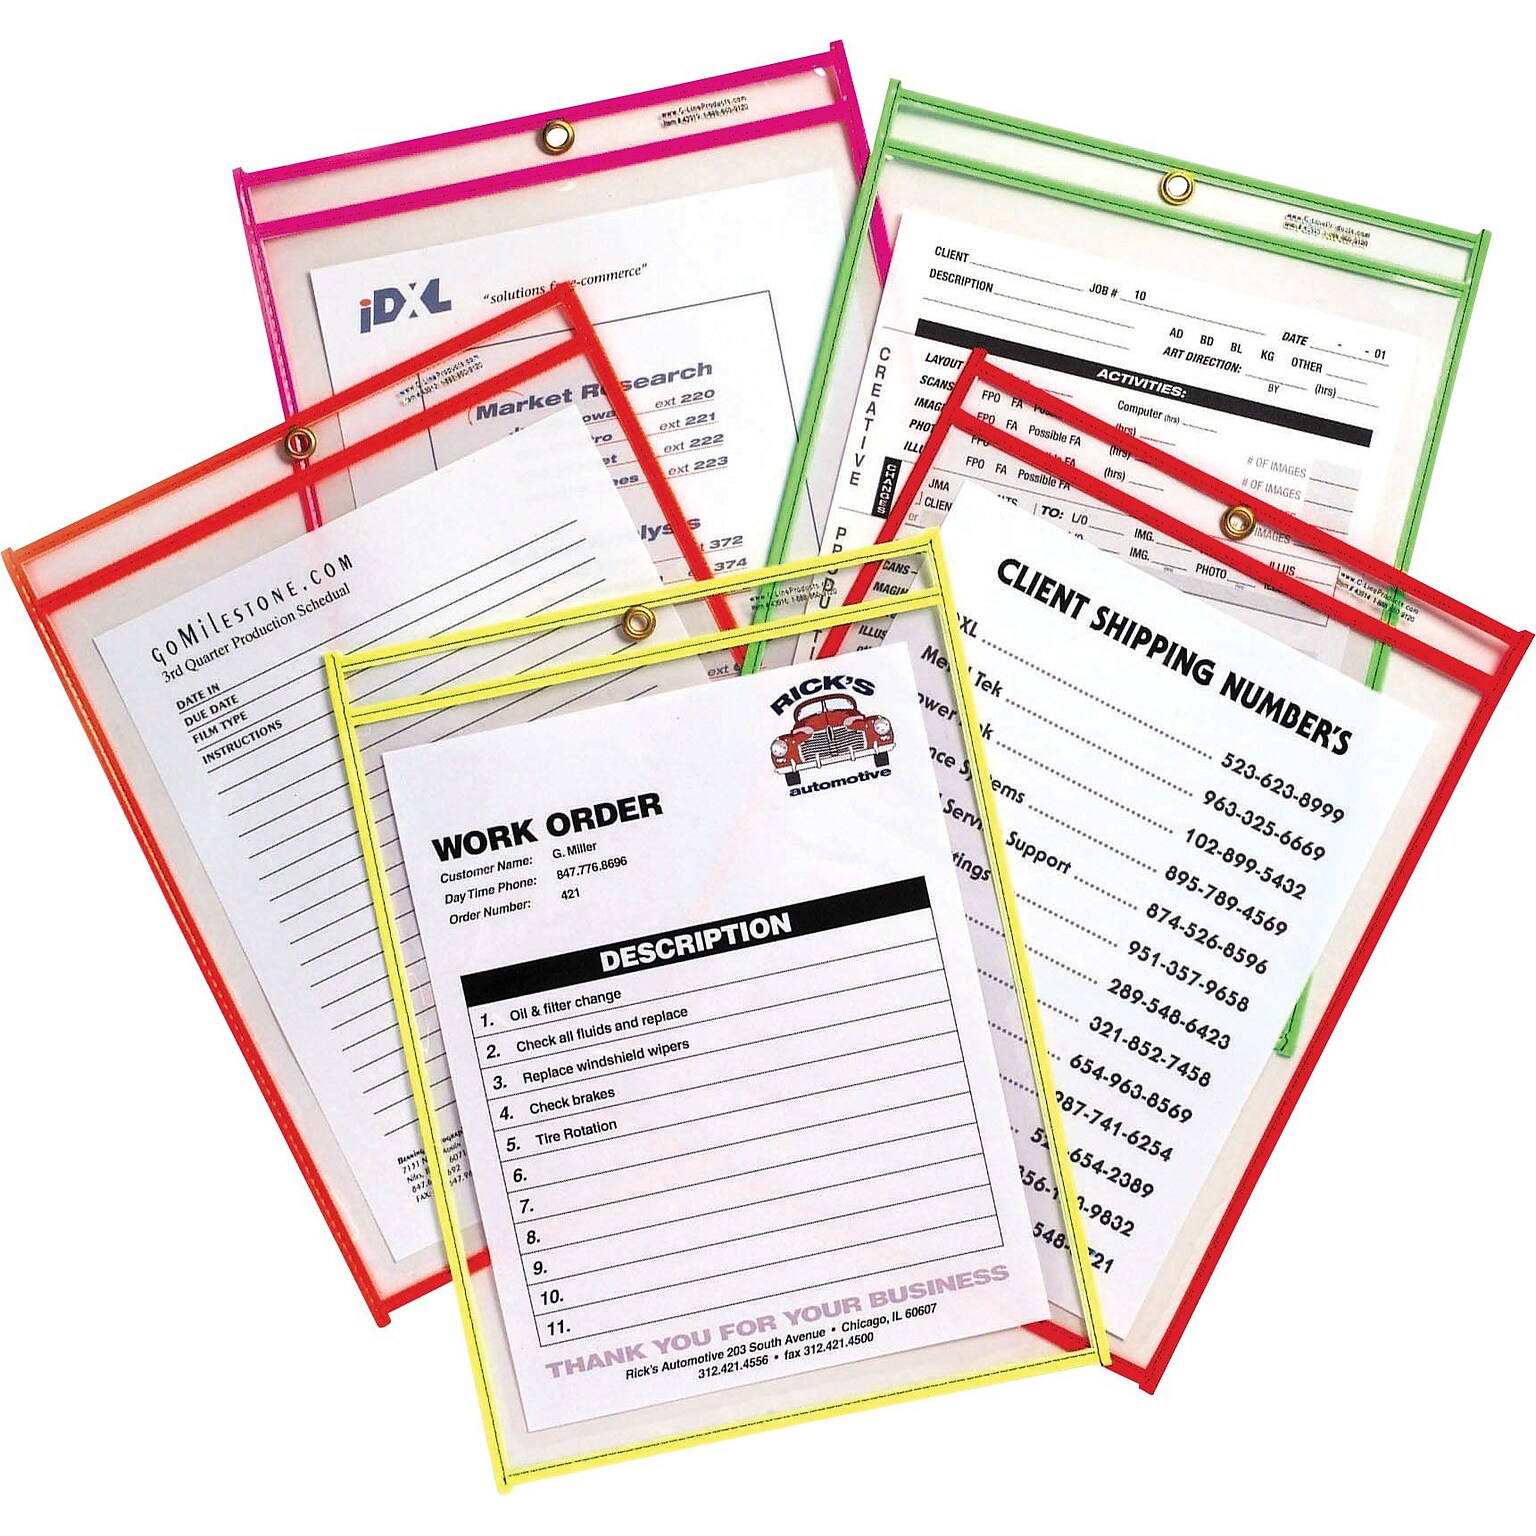 C-Line Stitched Shop/Job Ticket Holders, 9 x 12, Neon, 10/Pack (43920)